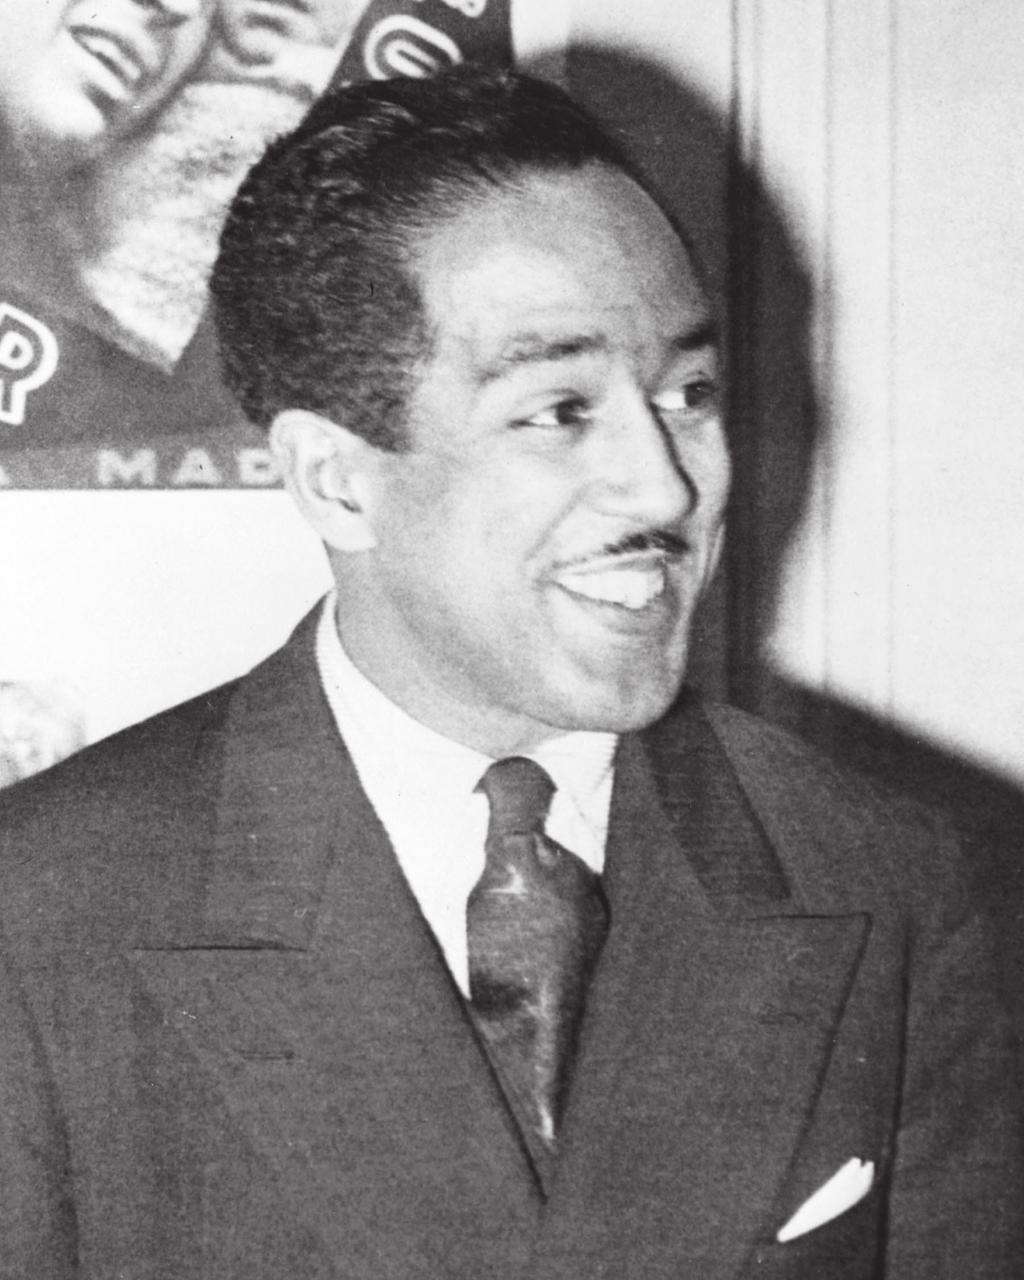 1 1 1 Langston Hughes 10-1 A leader of the Harlem Renaissance, James Mercer Langston Hughes was a writer and social activist who developed a new literary art form called jazz poetry.